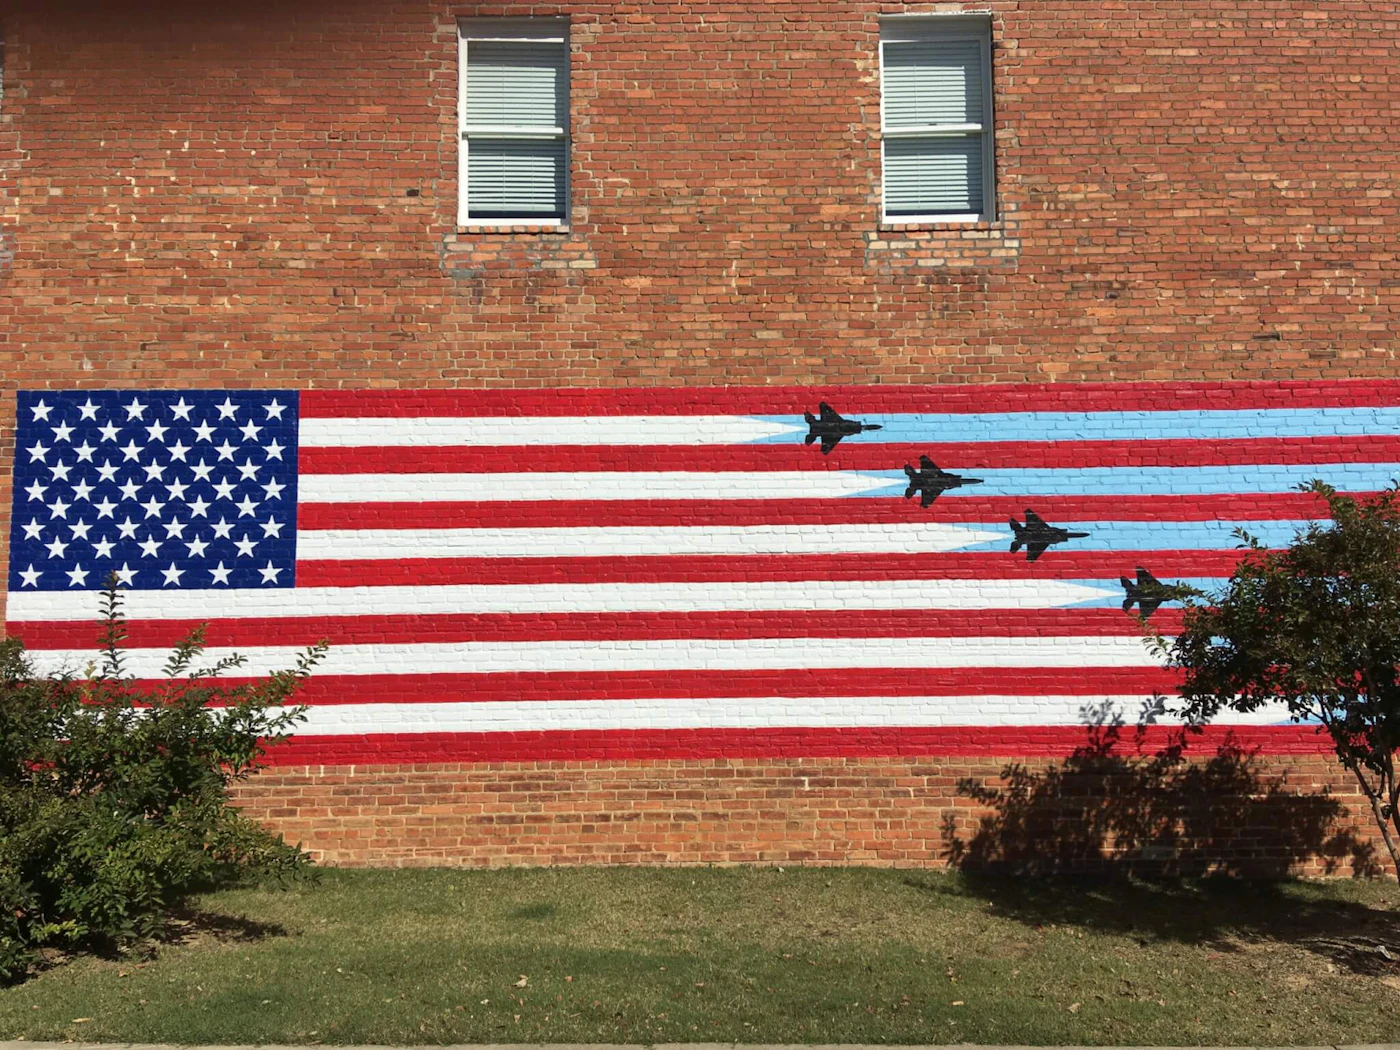 A mural in downtown Goldsboro. (Photo by Billy Ball)